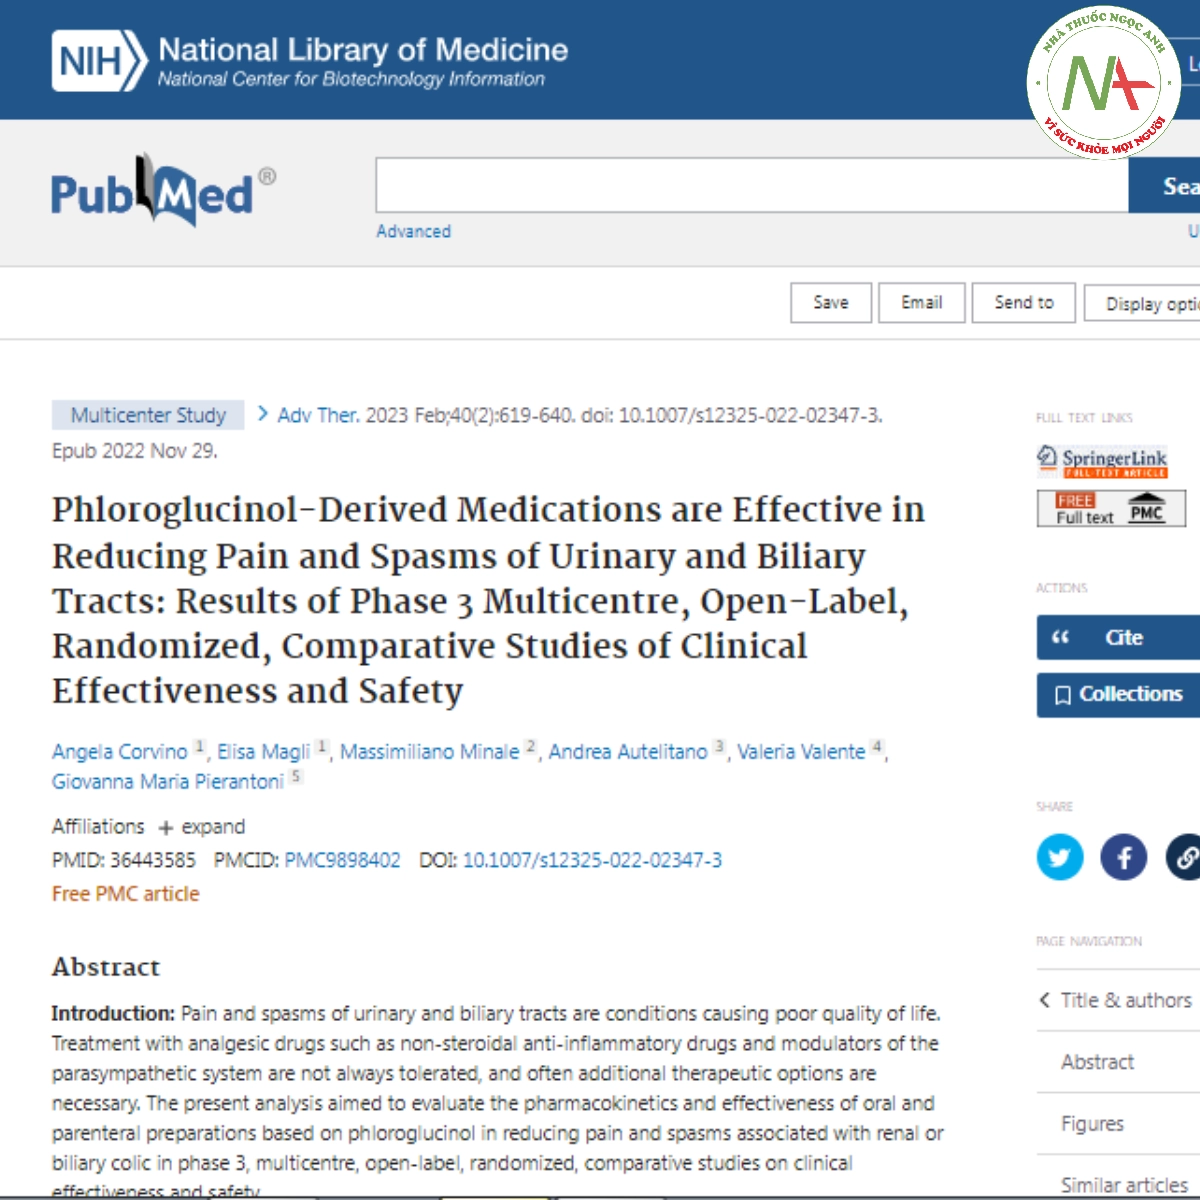 Phloroglucinol-Derived Medications are Effective in Reducing Pain and Spasms of Urinary and Biliary Tracts